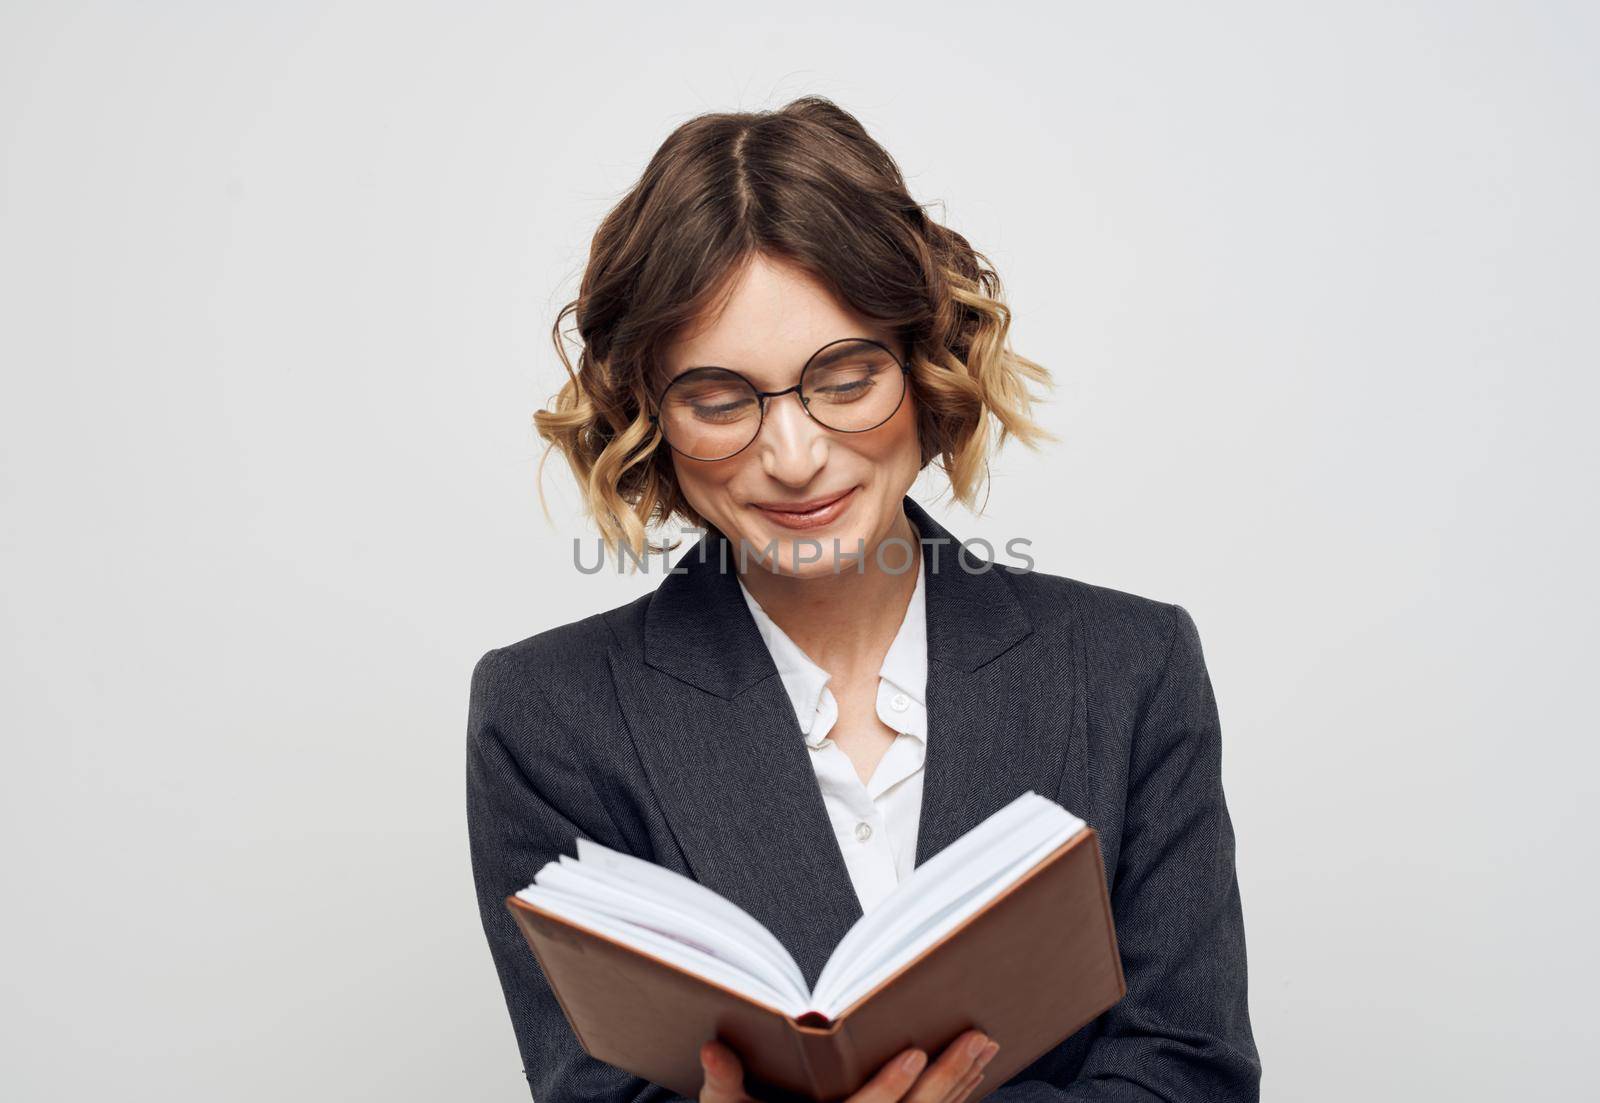 Woman in classic suit with open book glasses on face cropped view by SHOTPRIME